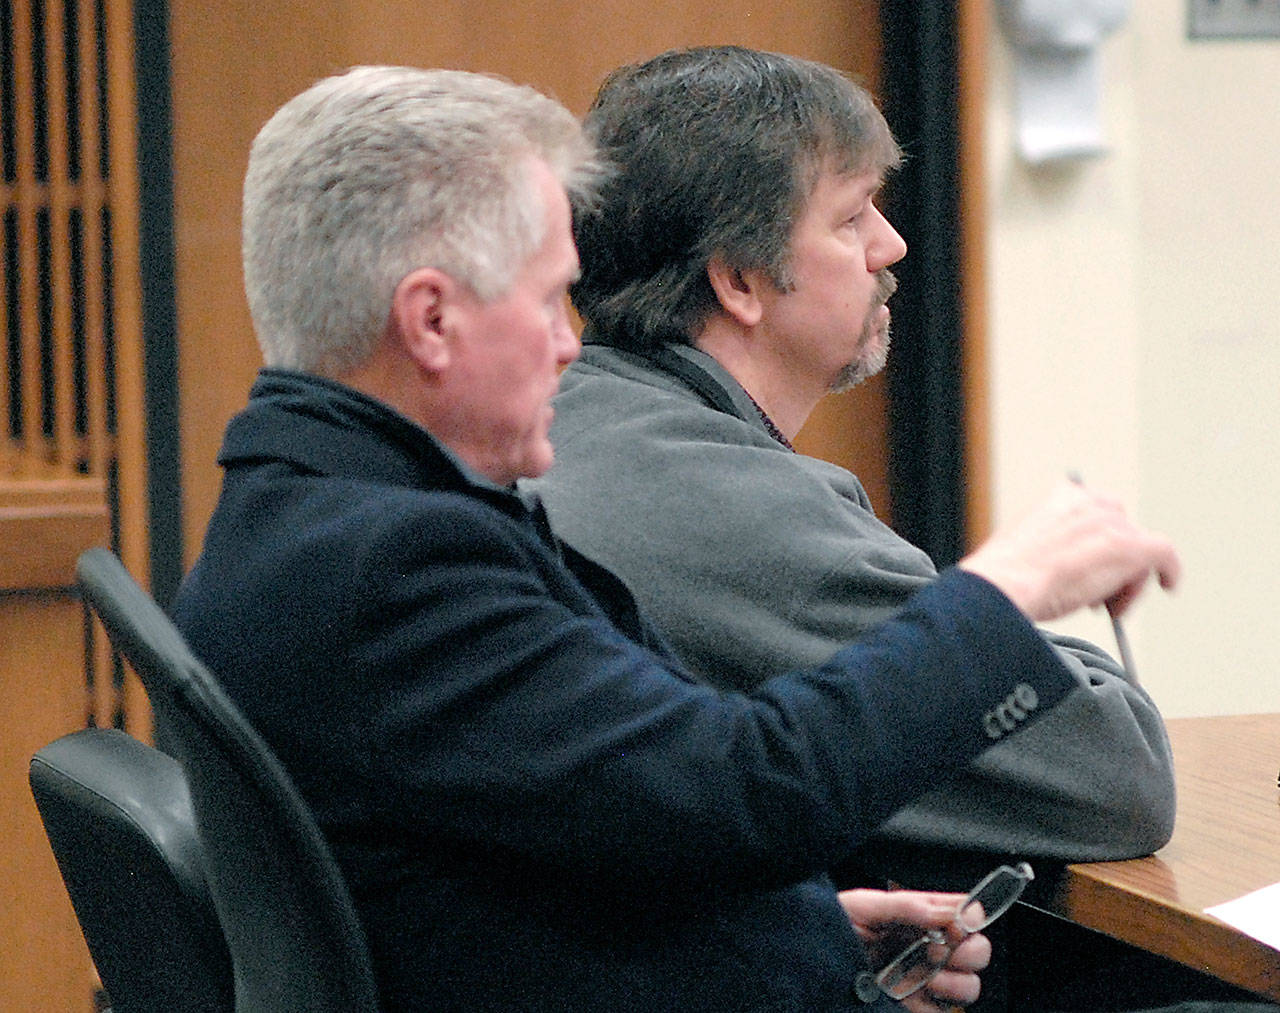 Vance Mattix, 50, of Joyce, right, sits with attorney Lane Wolfley during a change-of-plea hearing on charges of vehicular homicide Wednesday in Clallam County Superior Court in Port Angeles. (Keith Thorpe/Peninsula Daily News)